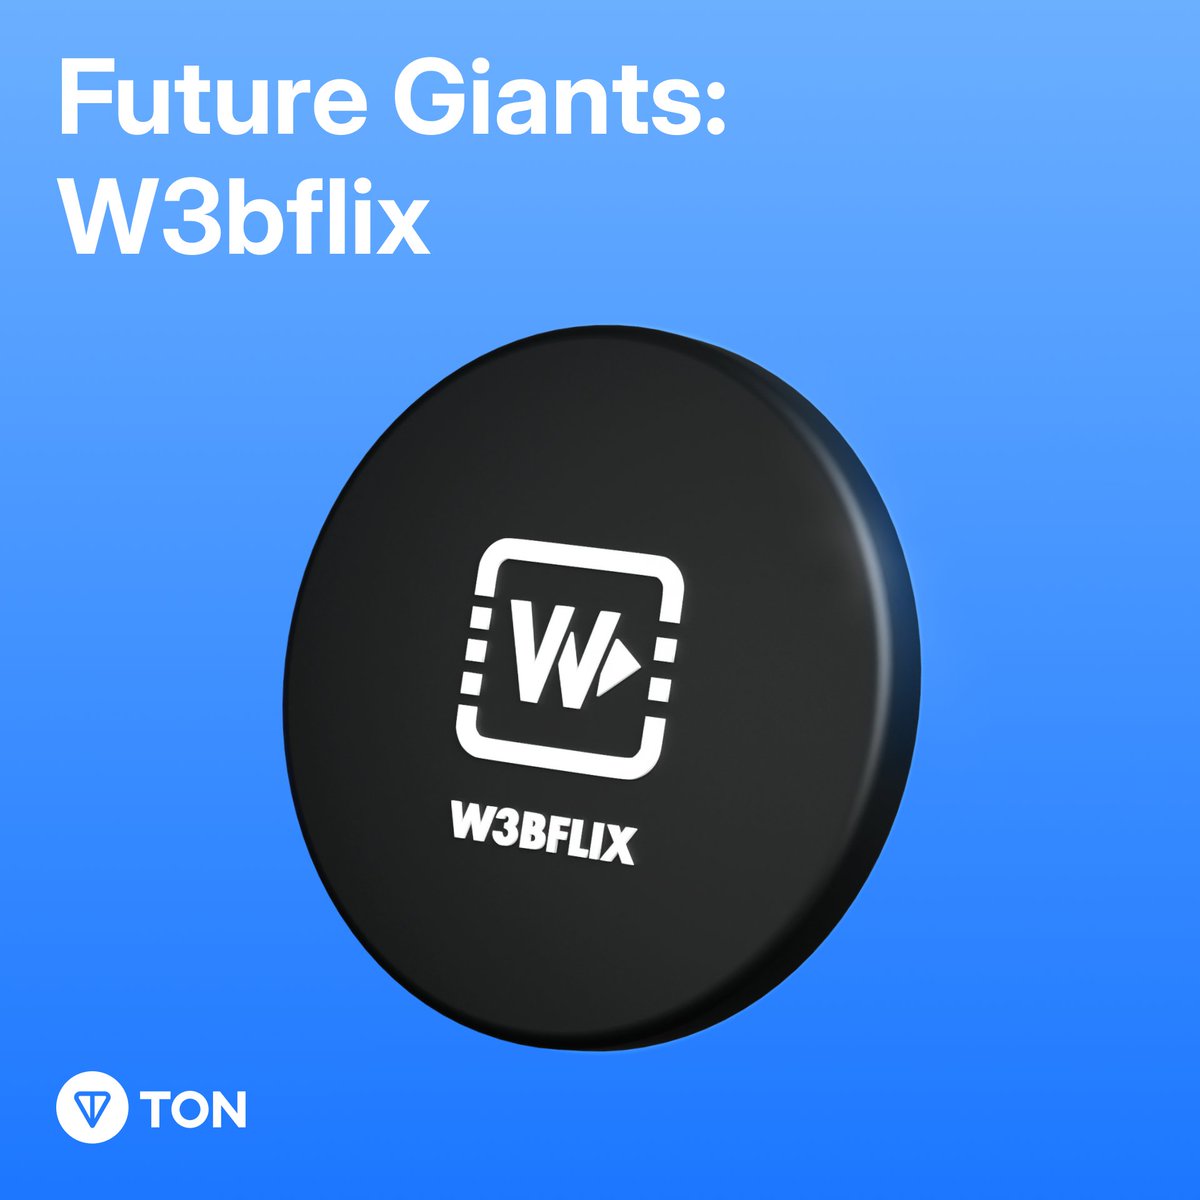 Introducing @w3bflix 🎬🍿 In our newly launched blog series 'Future Giants', we interviewed W3BFLIX, aiming to become the ‘Netflix’ on @telegram — an innovative streaming service & film crowdfunding platform being developed on #TON & soon to be accessible via a Telegram Mini App